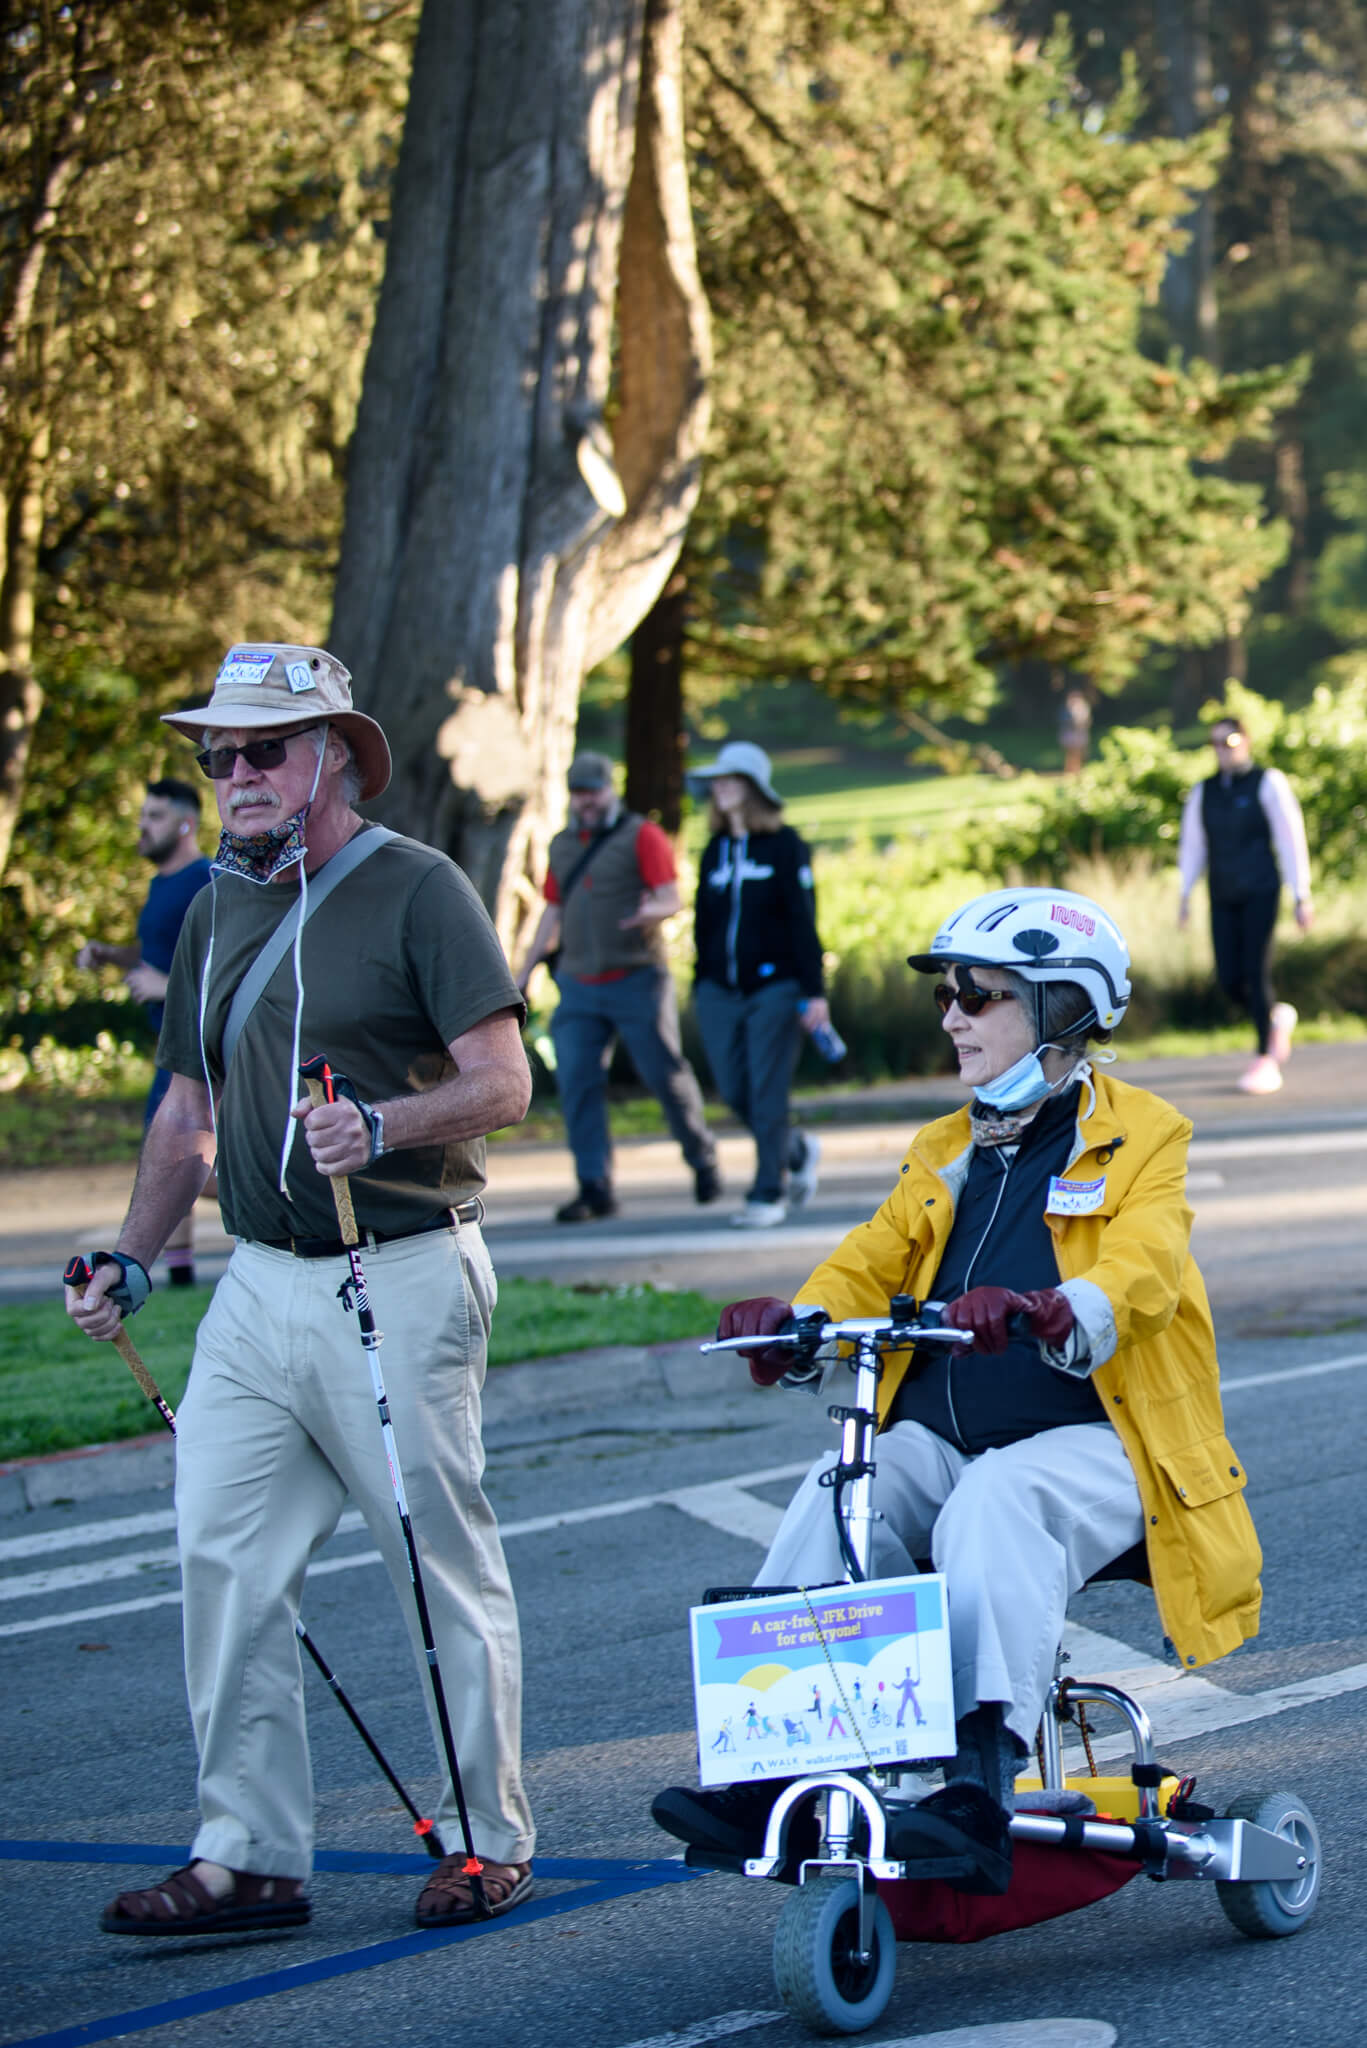 The Golden Gate Park Shuttle: Back and Better than Ever!